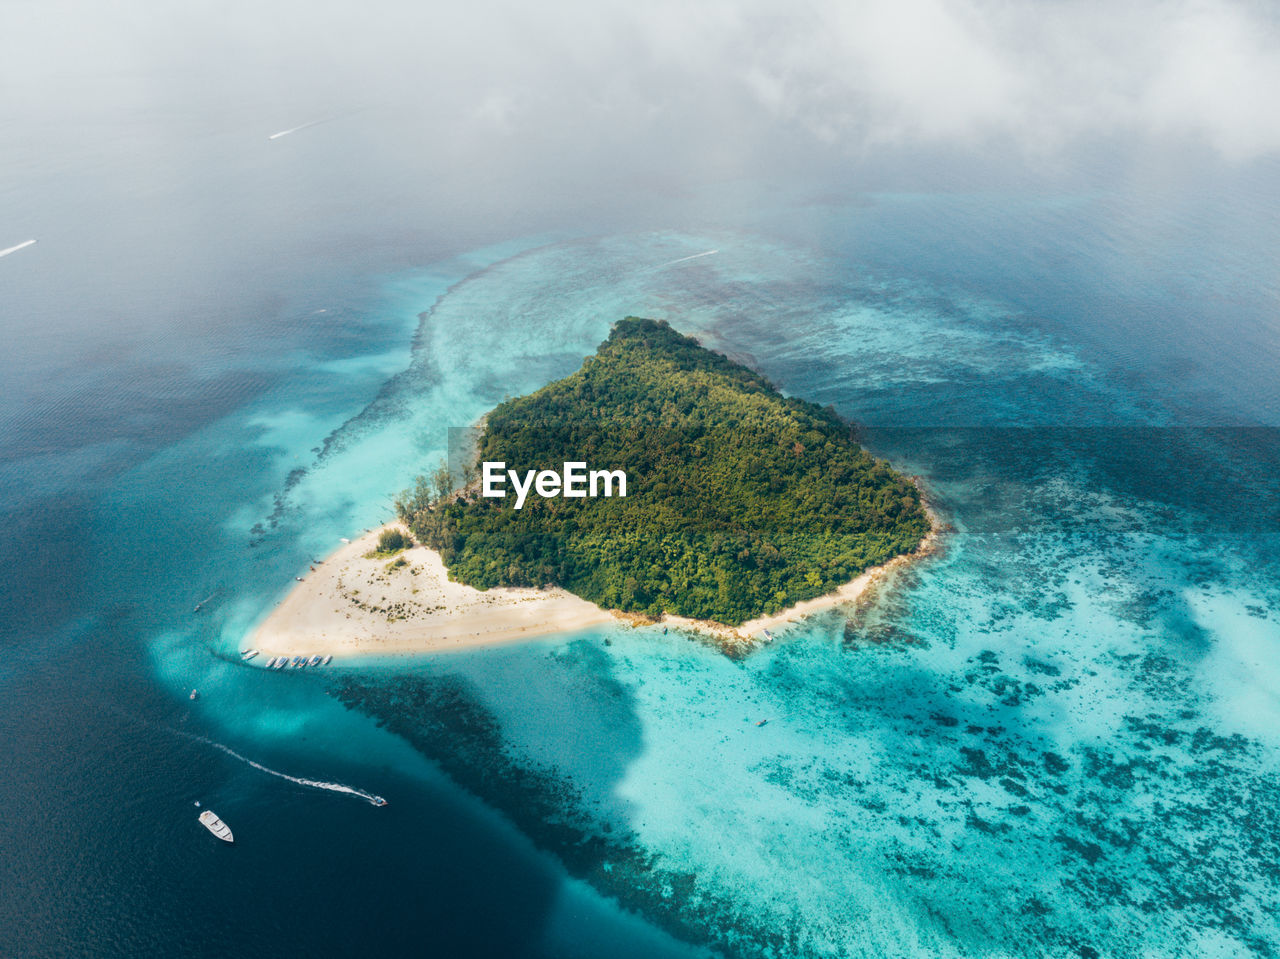 High-angle view of an island against sky